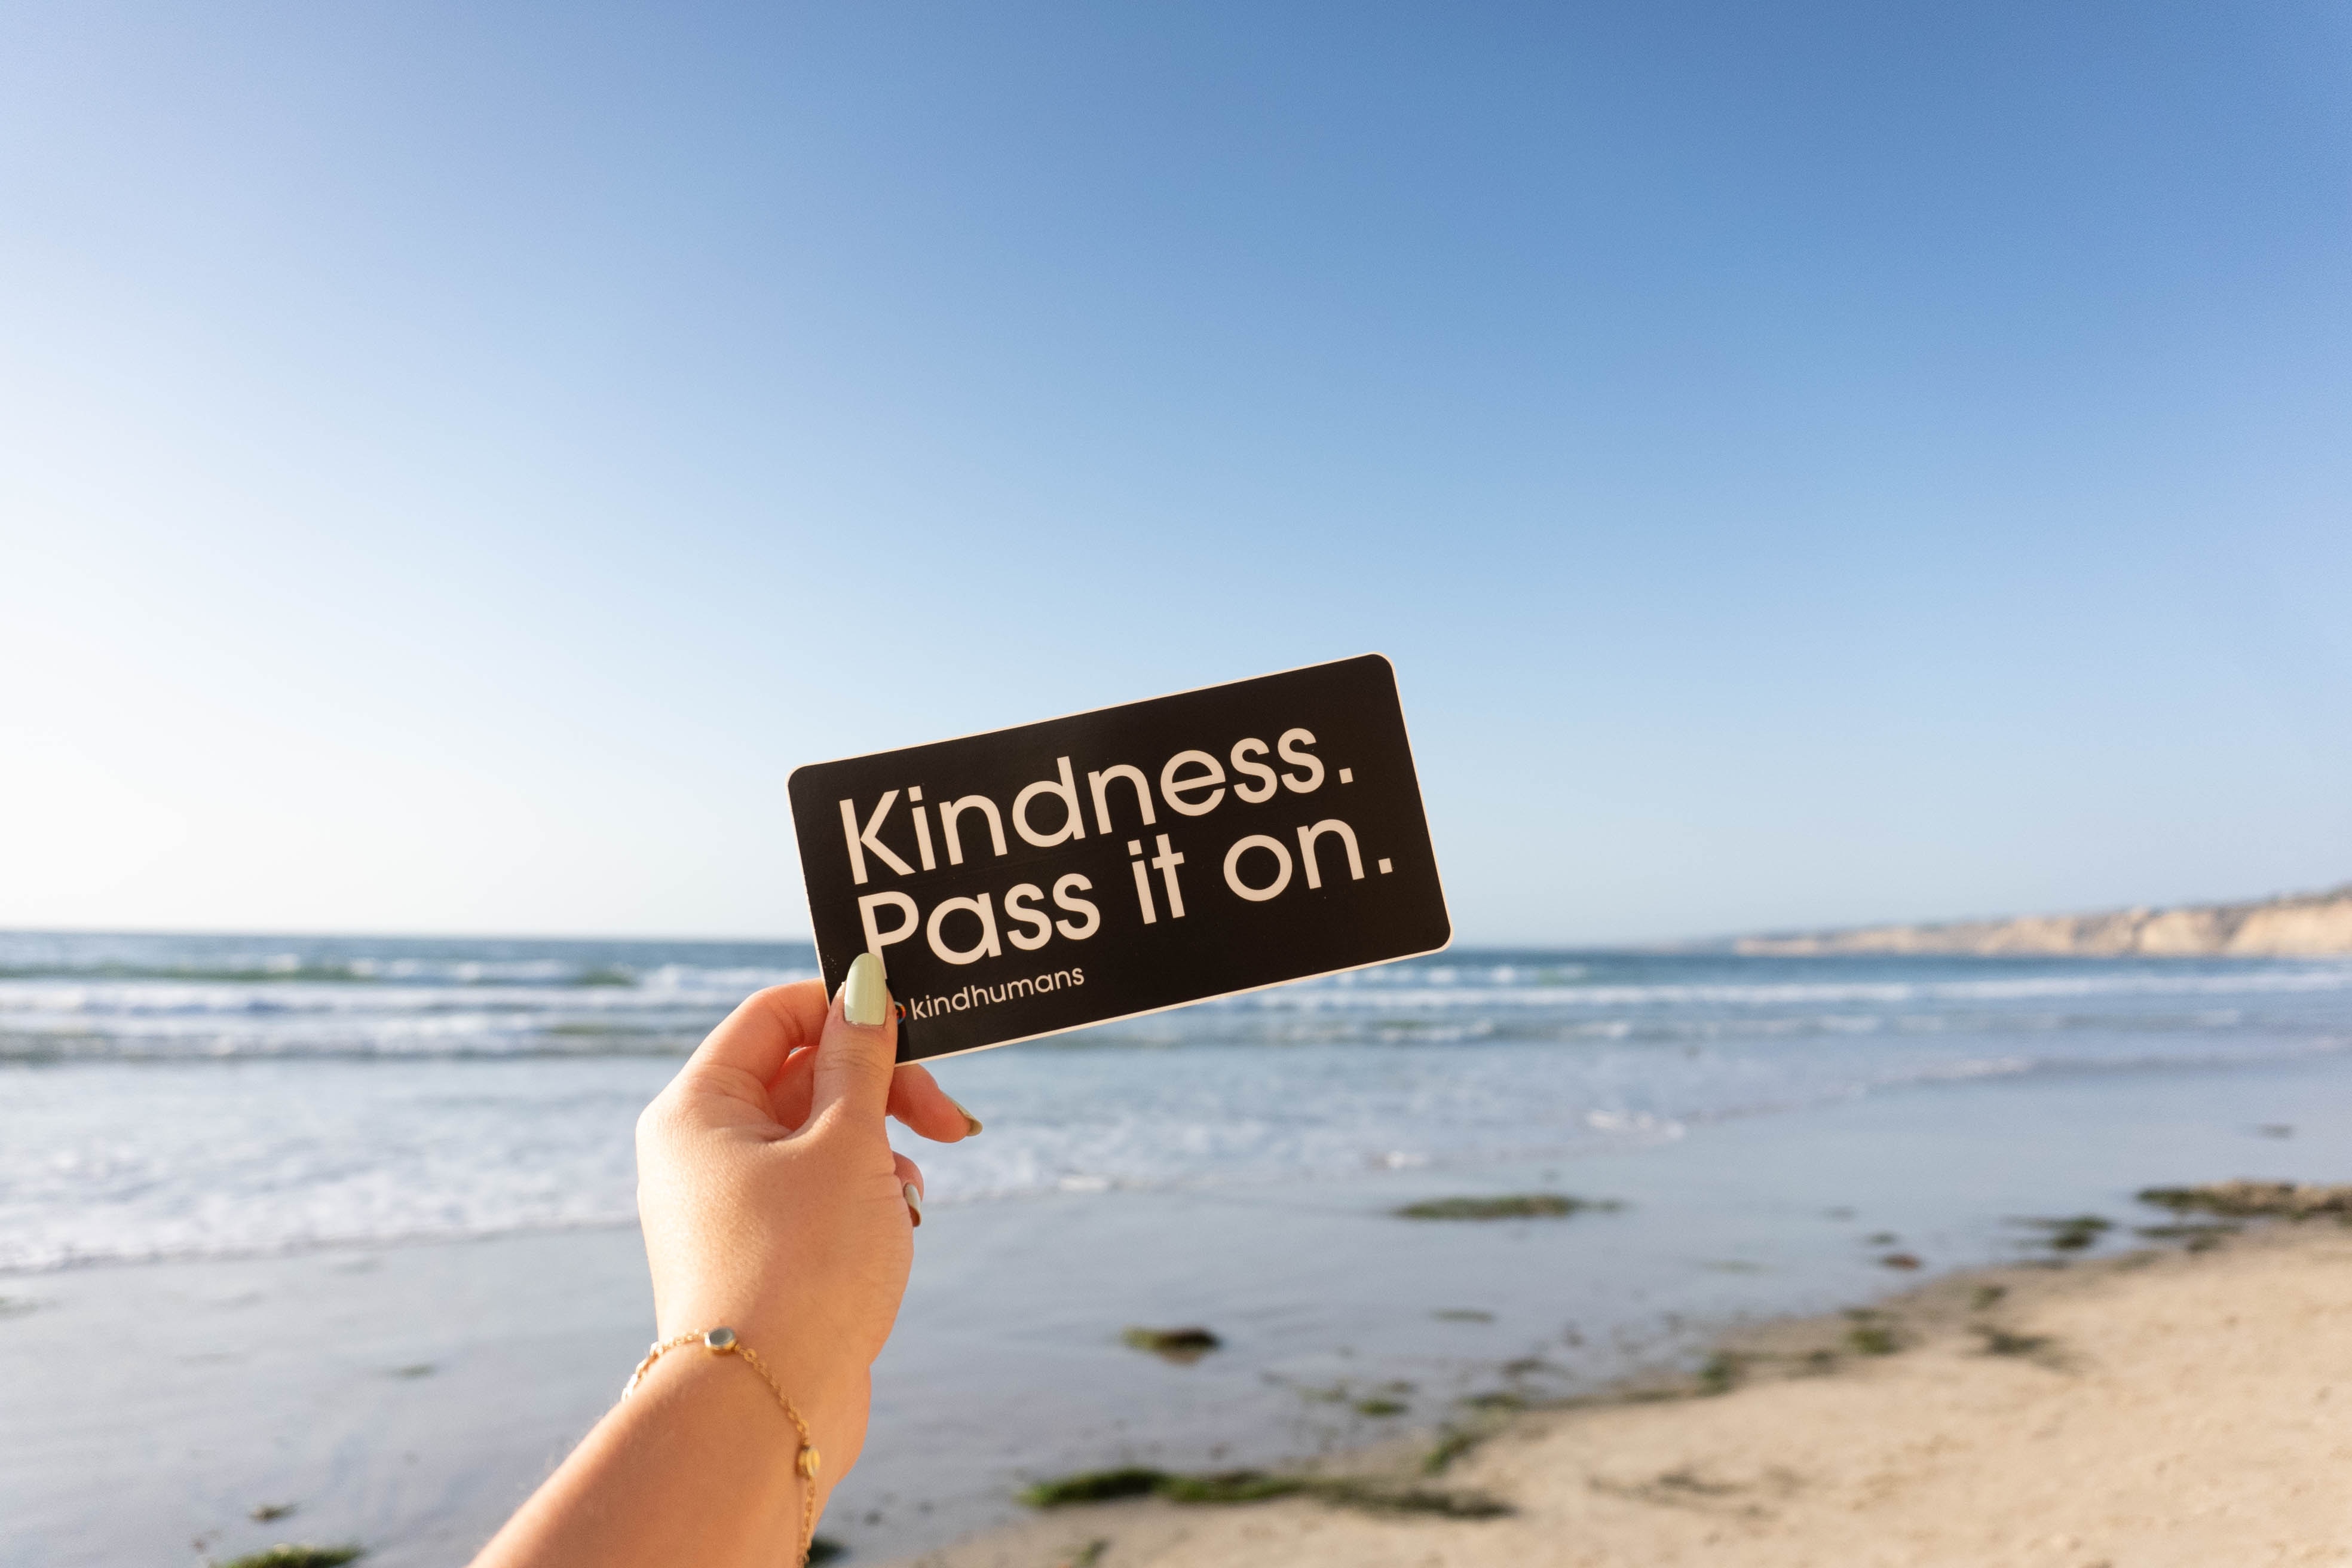 6 Reasons We Don’t Always Practice Kindness